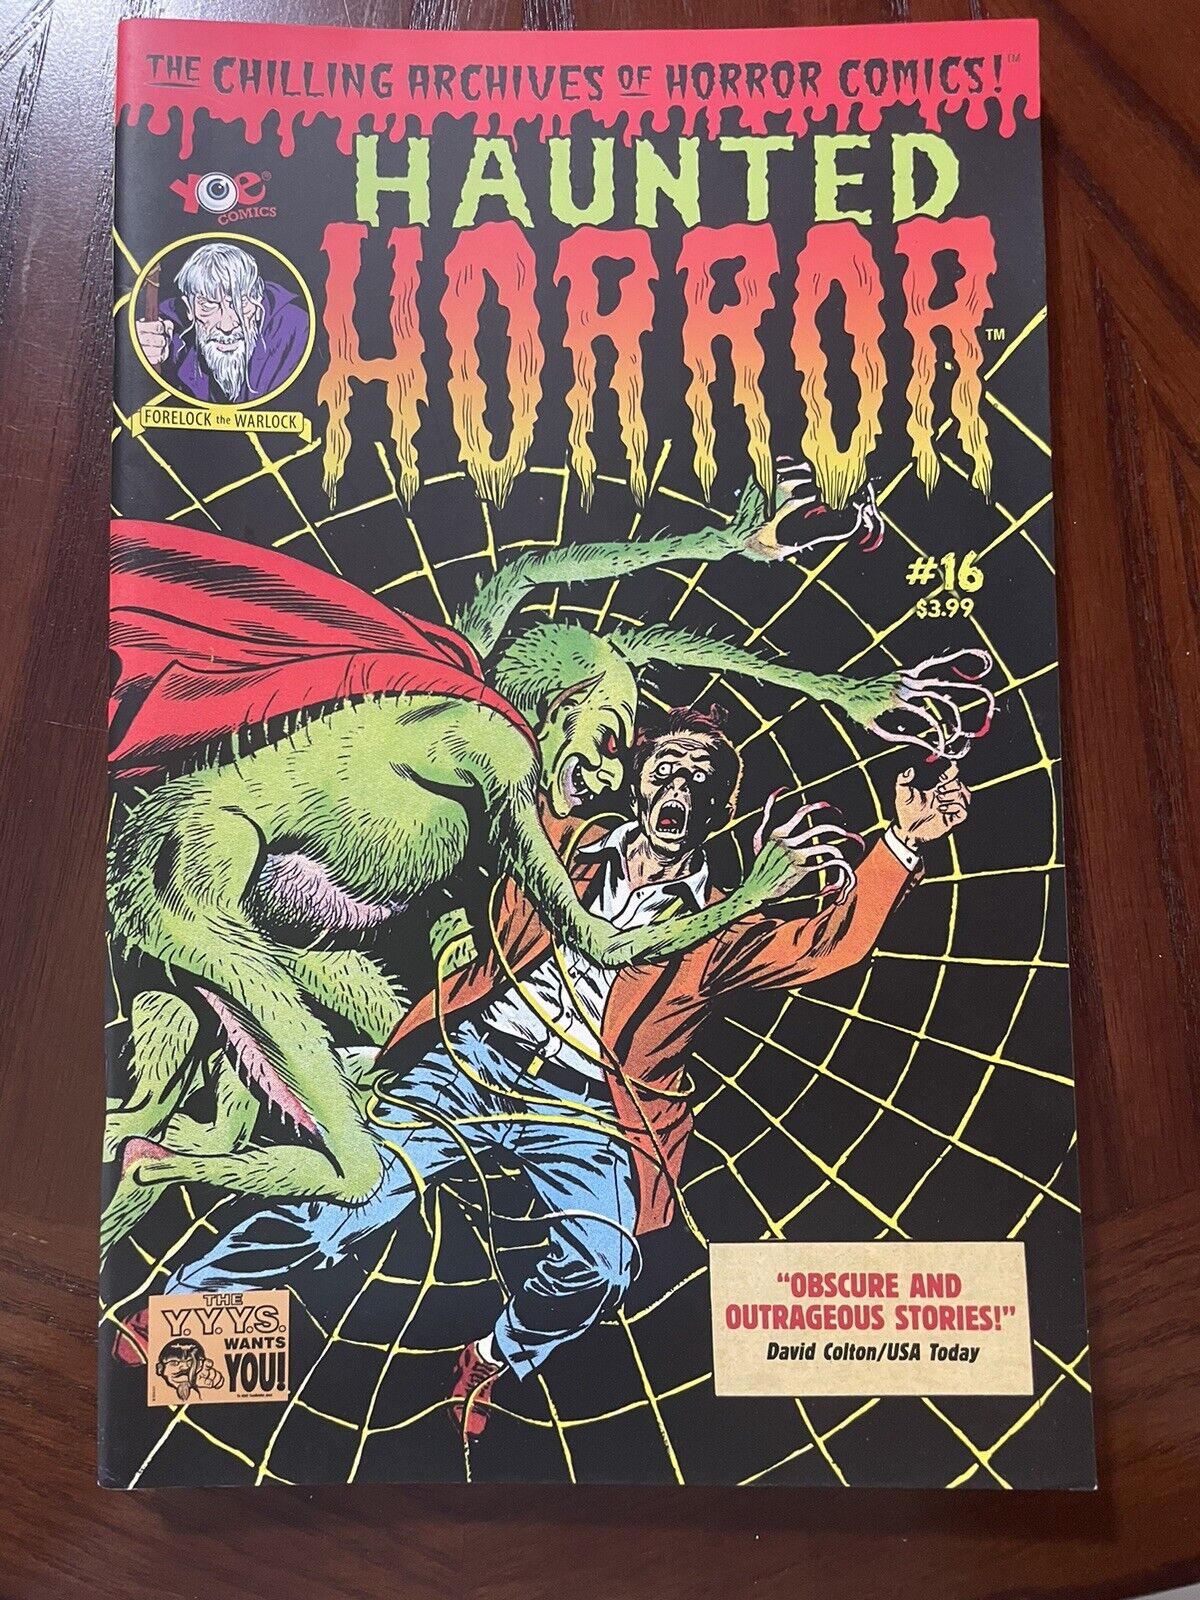 Haunted Horror Comics #16 #17 #18   The Chilling Archives of Horror Comics